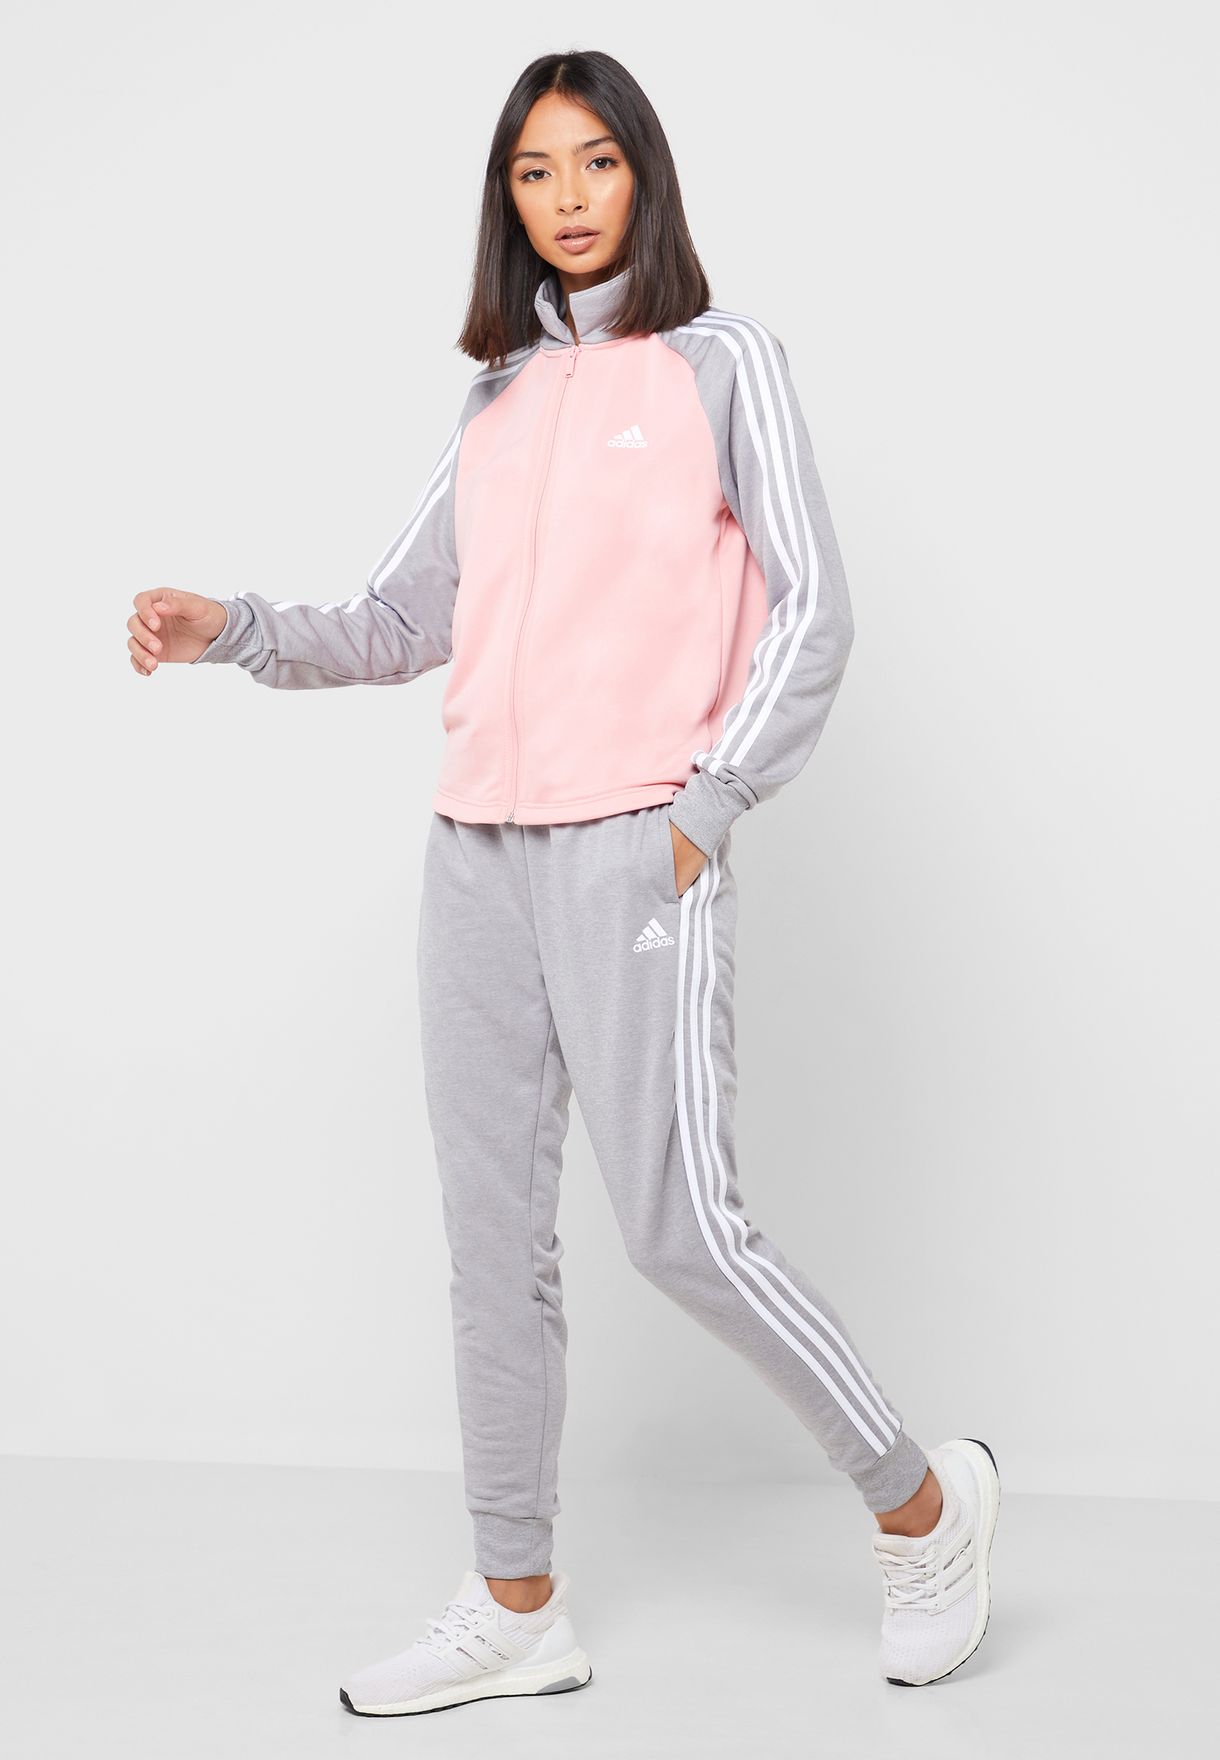 Adidas Gametime Tracksuit Womens | vlr.eng.br